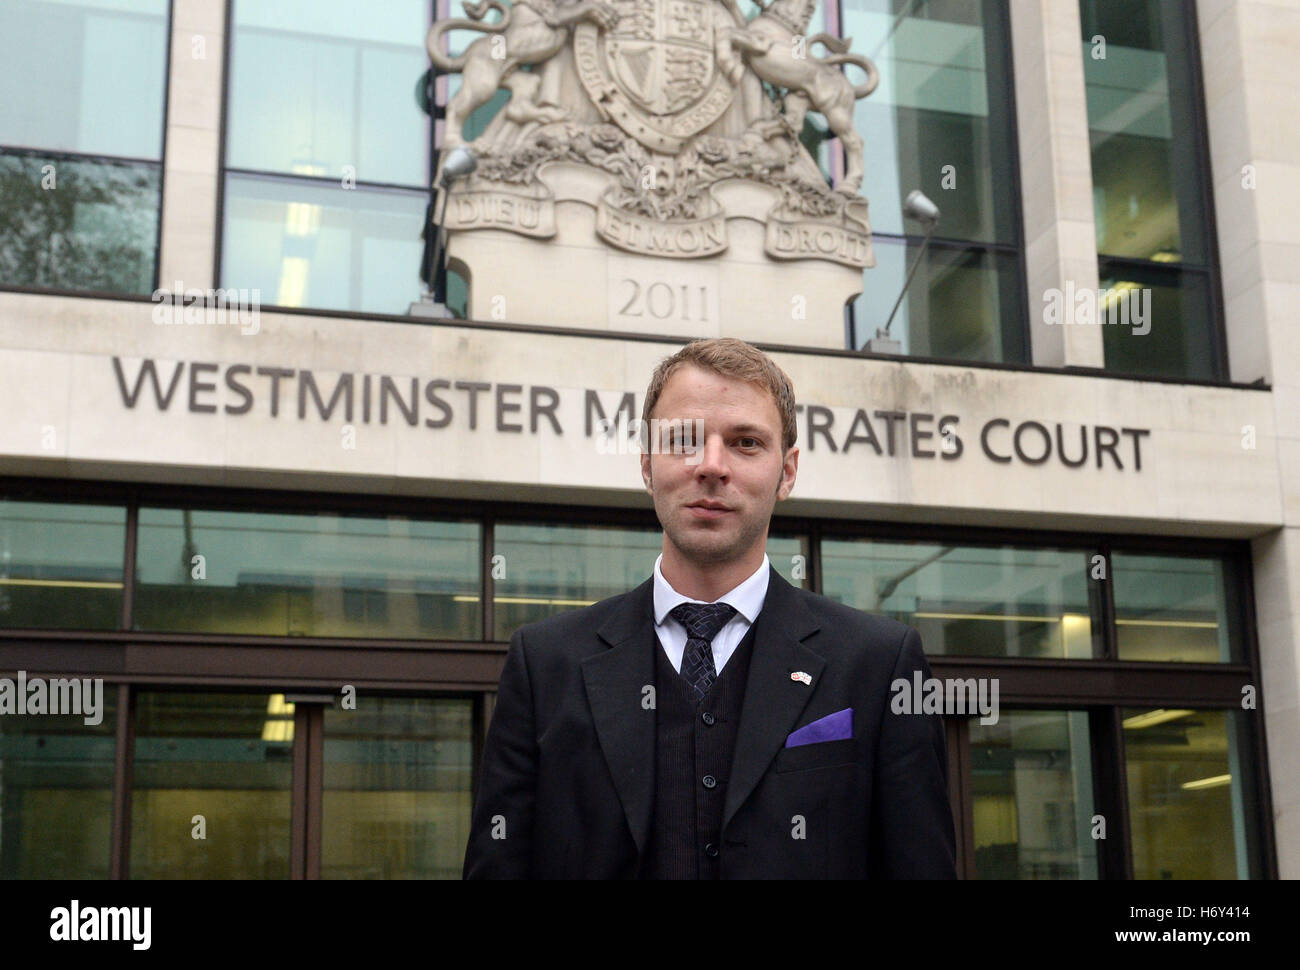 Paul Wright stands outside Westminster Magistrates' Court, London, where a hearing to decide whether he should be extradited to Greece 13 years after a crash while he was on holiday with his friends is due to take place. Stock Photo